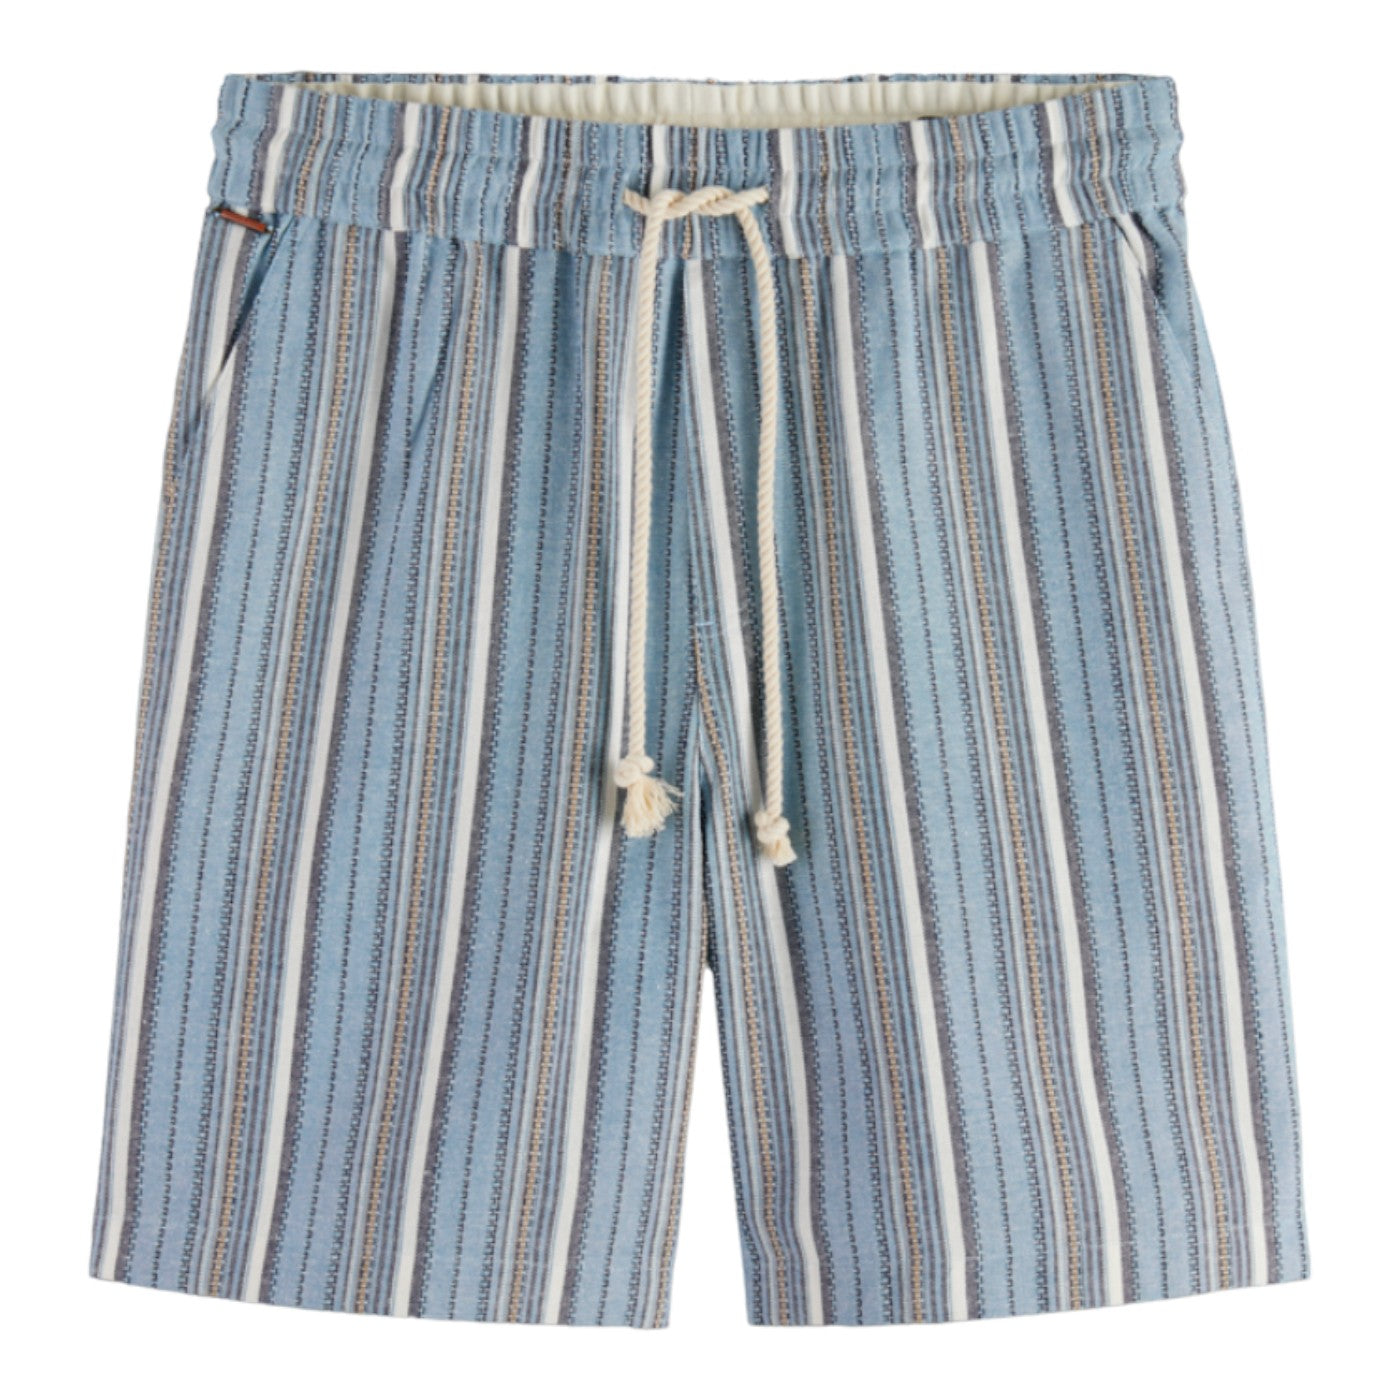 Blue striped shorts with draw string